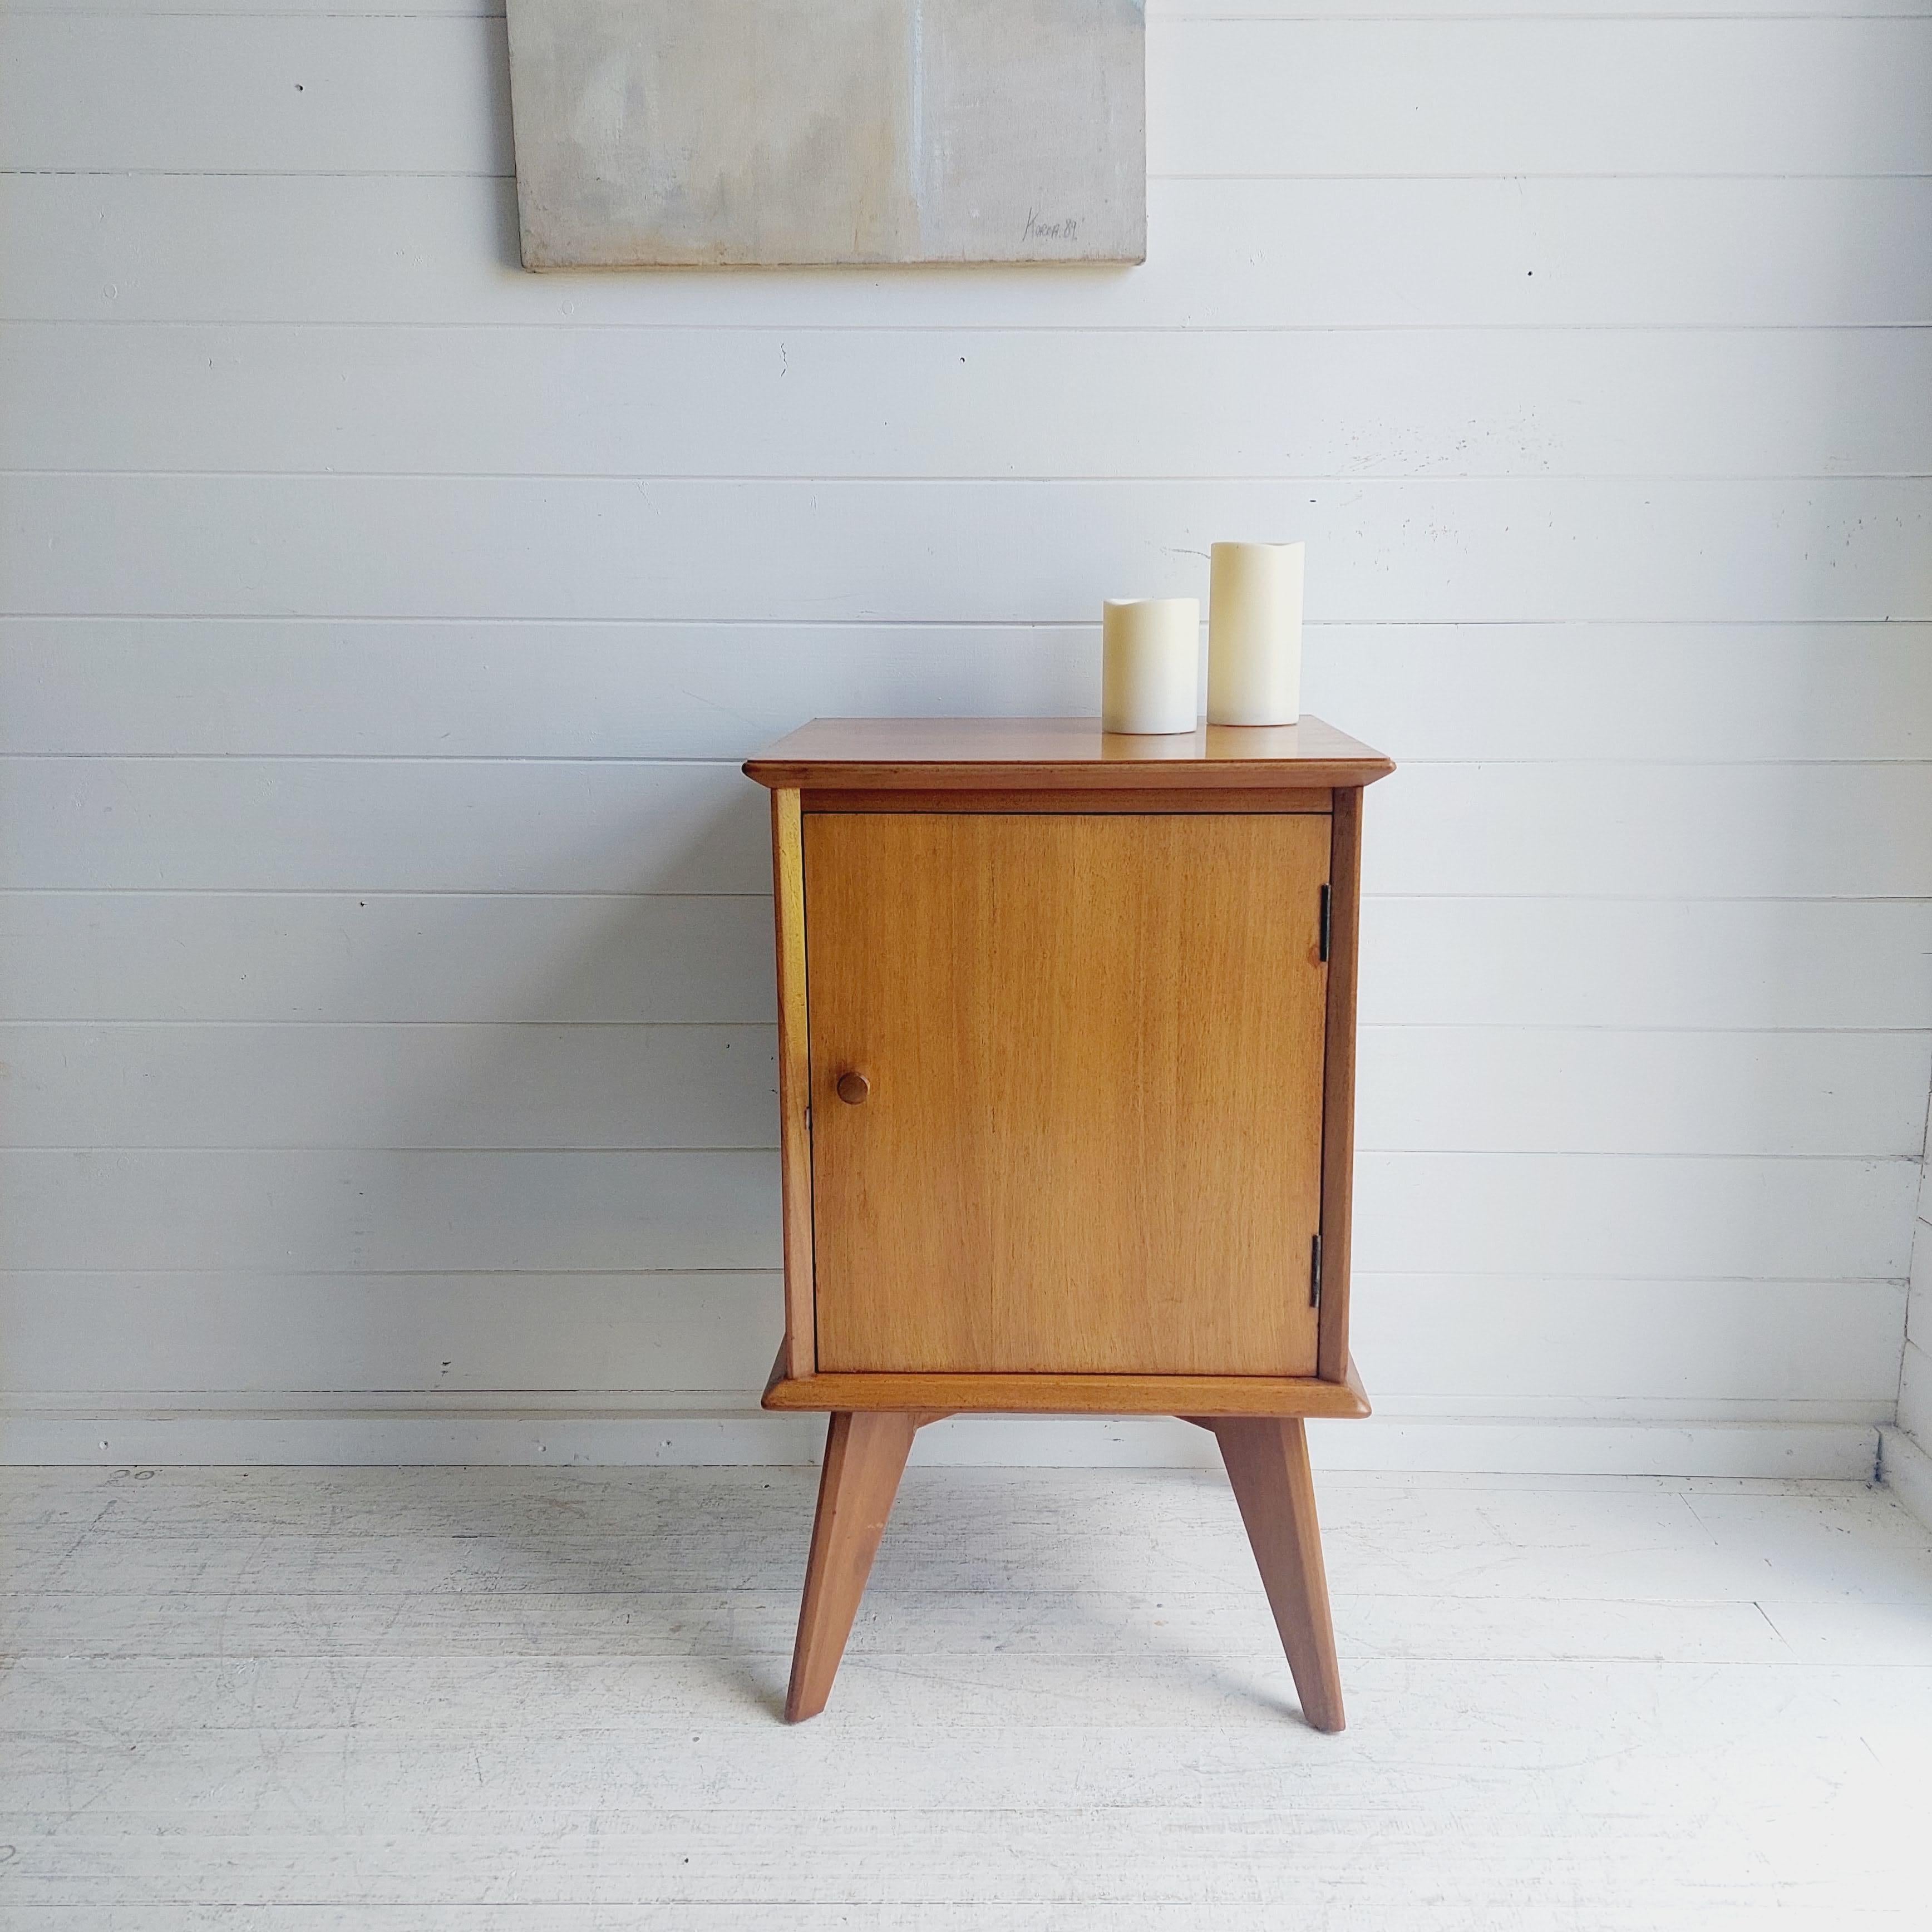 A stylish and extremely well made bedside cabinet in Walnut.
This was made probably by Alfred Cox, it dates from the 1950-60's. 

Featuring:
Lovely light coloured satin walnut 
Tall splayed hardwood legs 
Overhanging top surface and bottom base